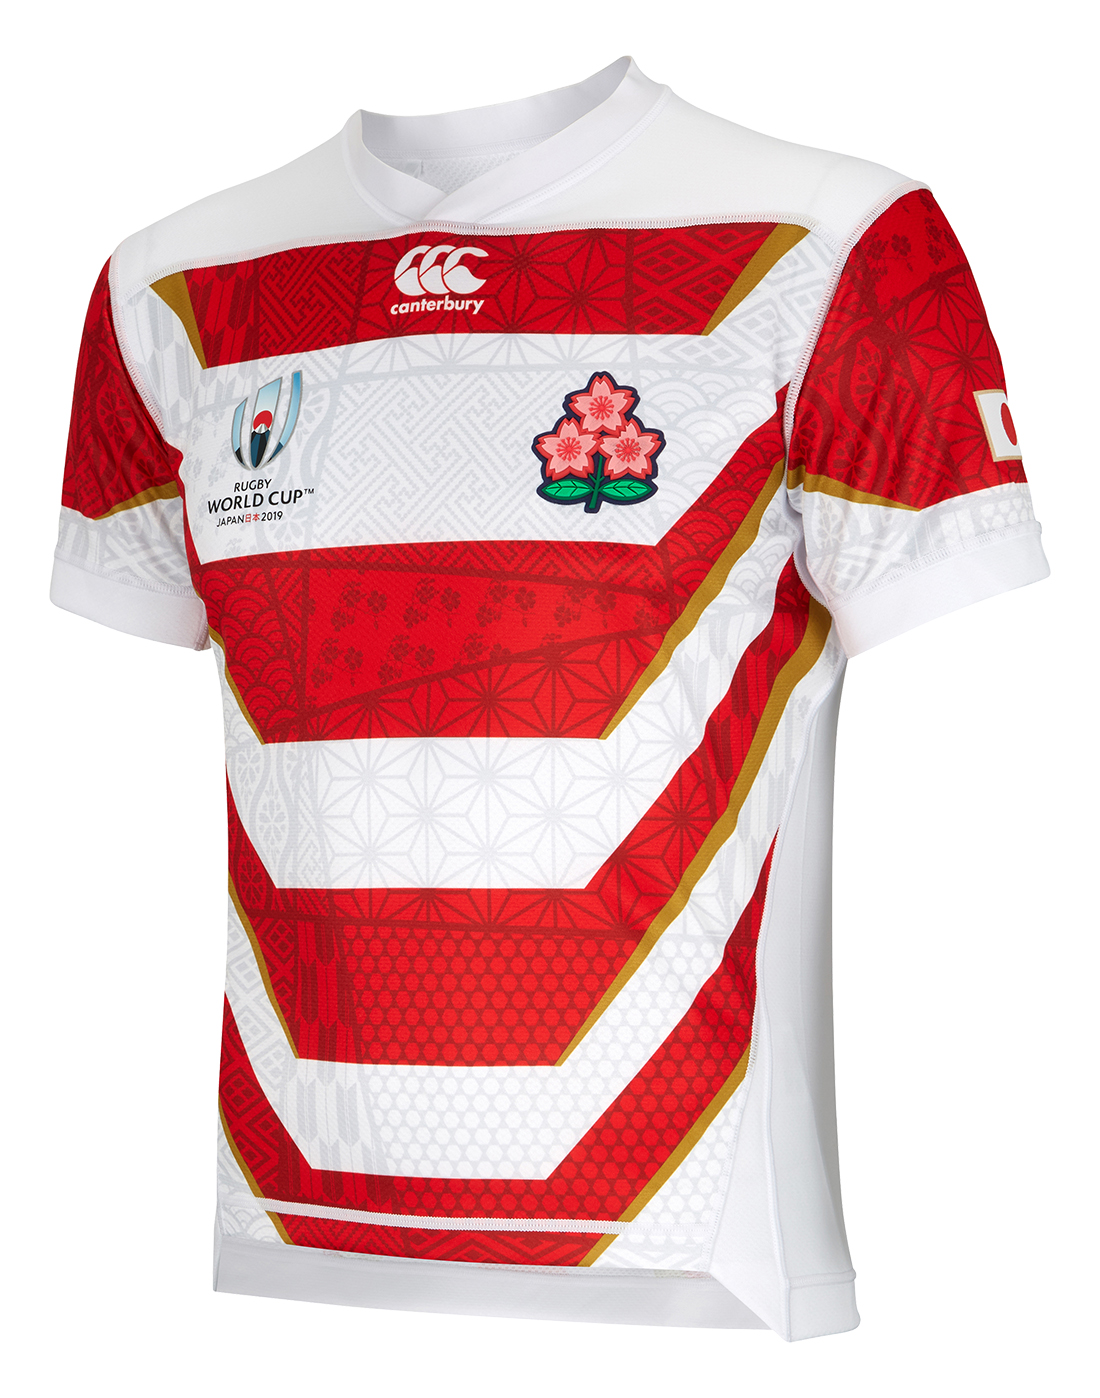 buy japan rugby jersey